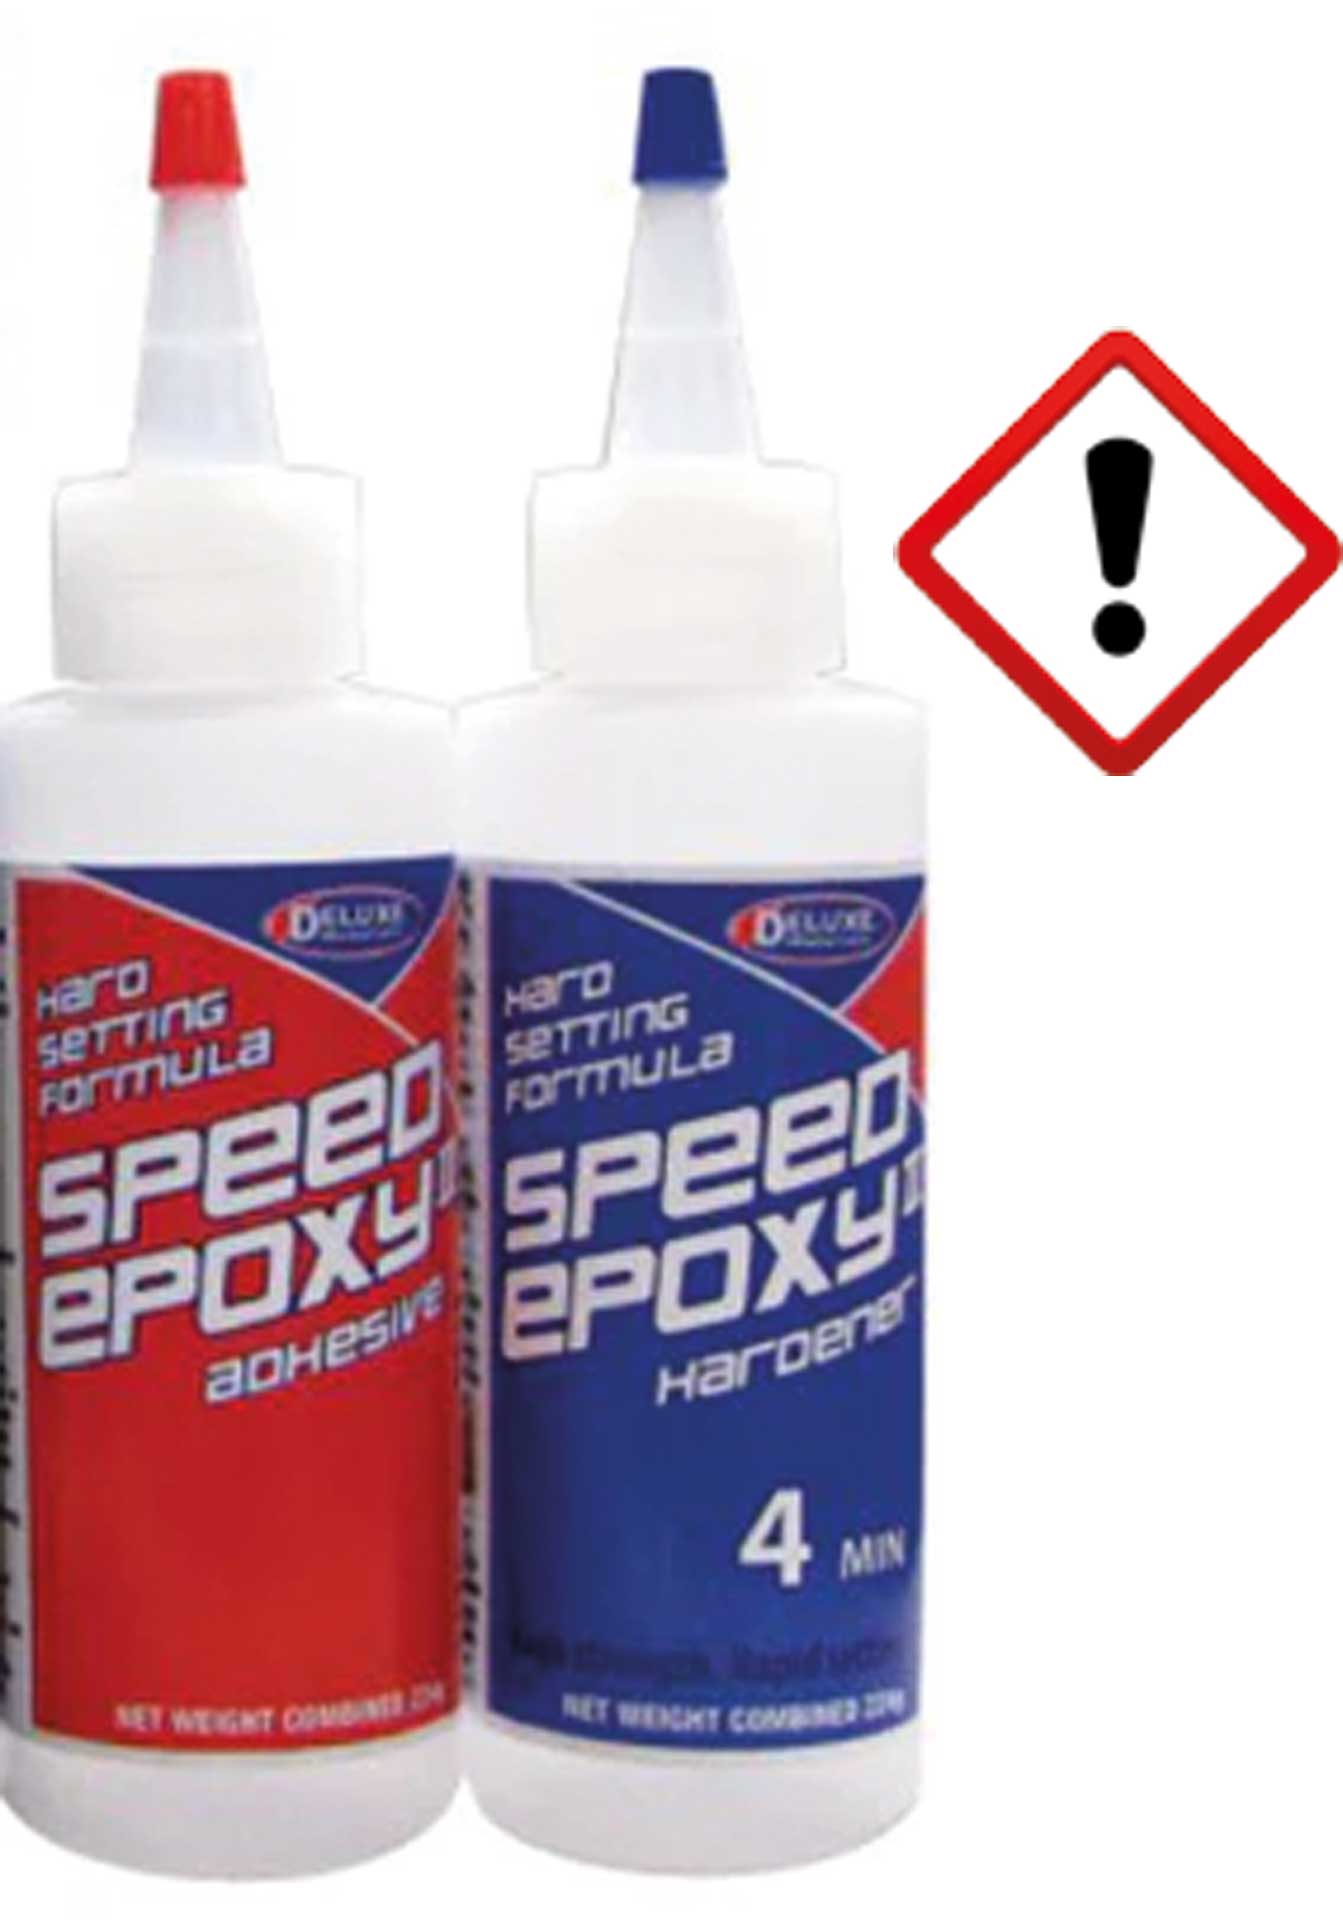 DELUXE SPEED EPOXY II 4 MINUTE 224G BOUTEILLE COLLE